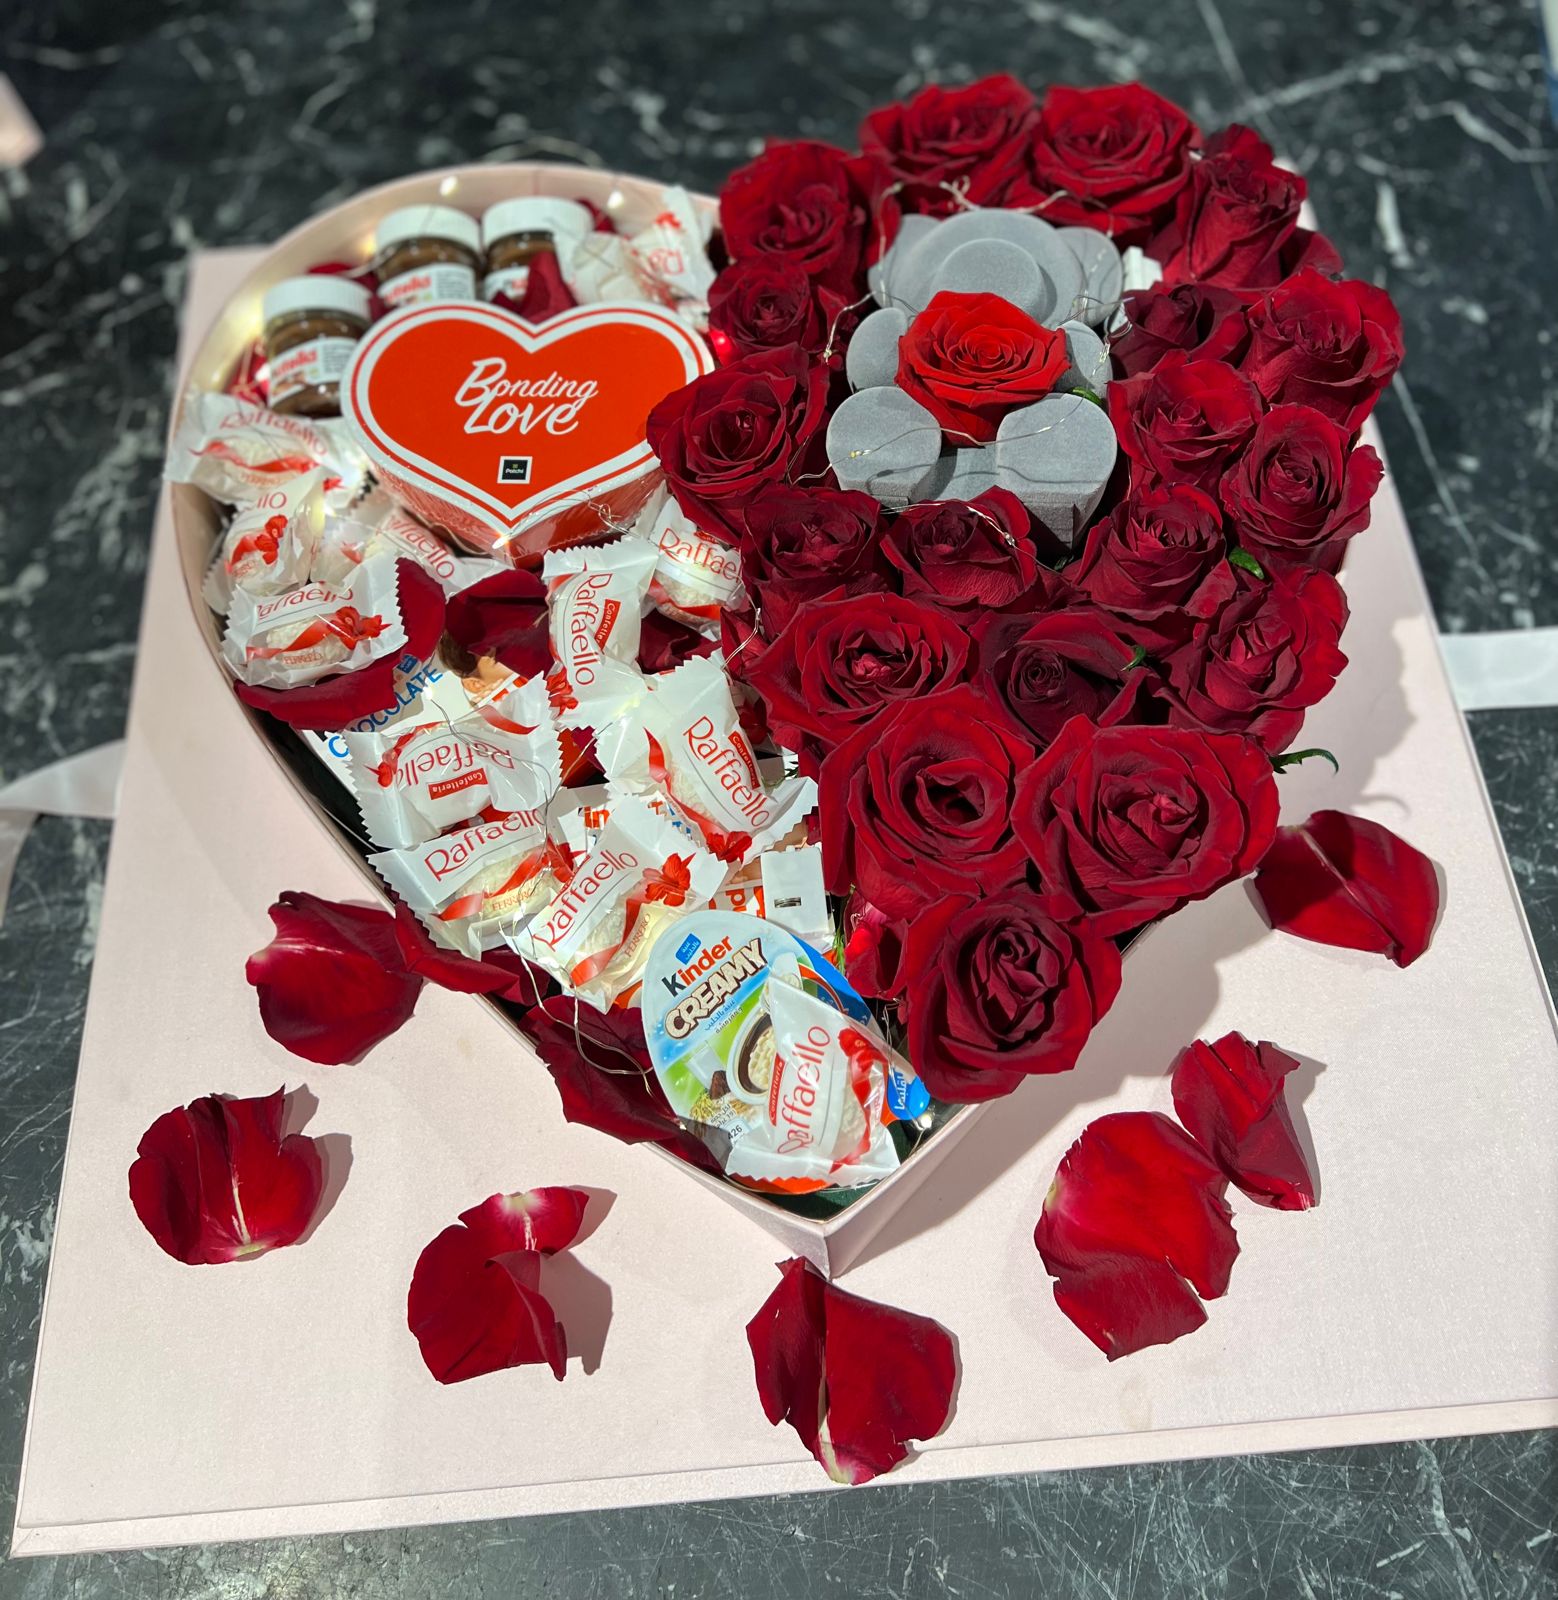 Big Heart Chocolate & Flowers with Forever Rose - Bae3at Elward flower shop 